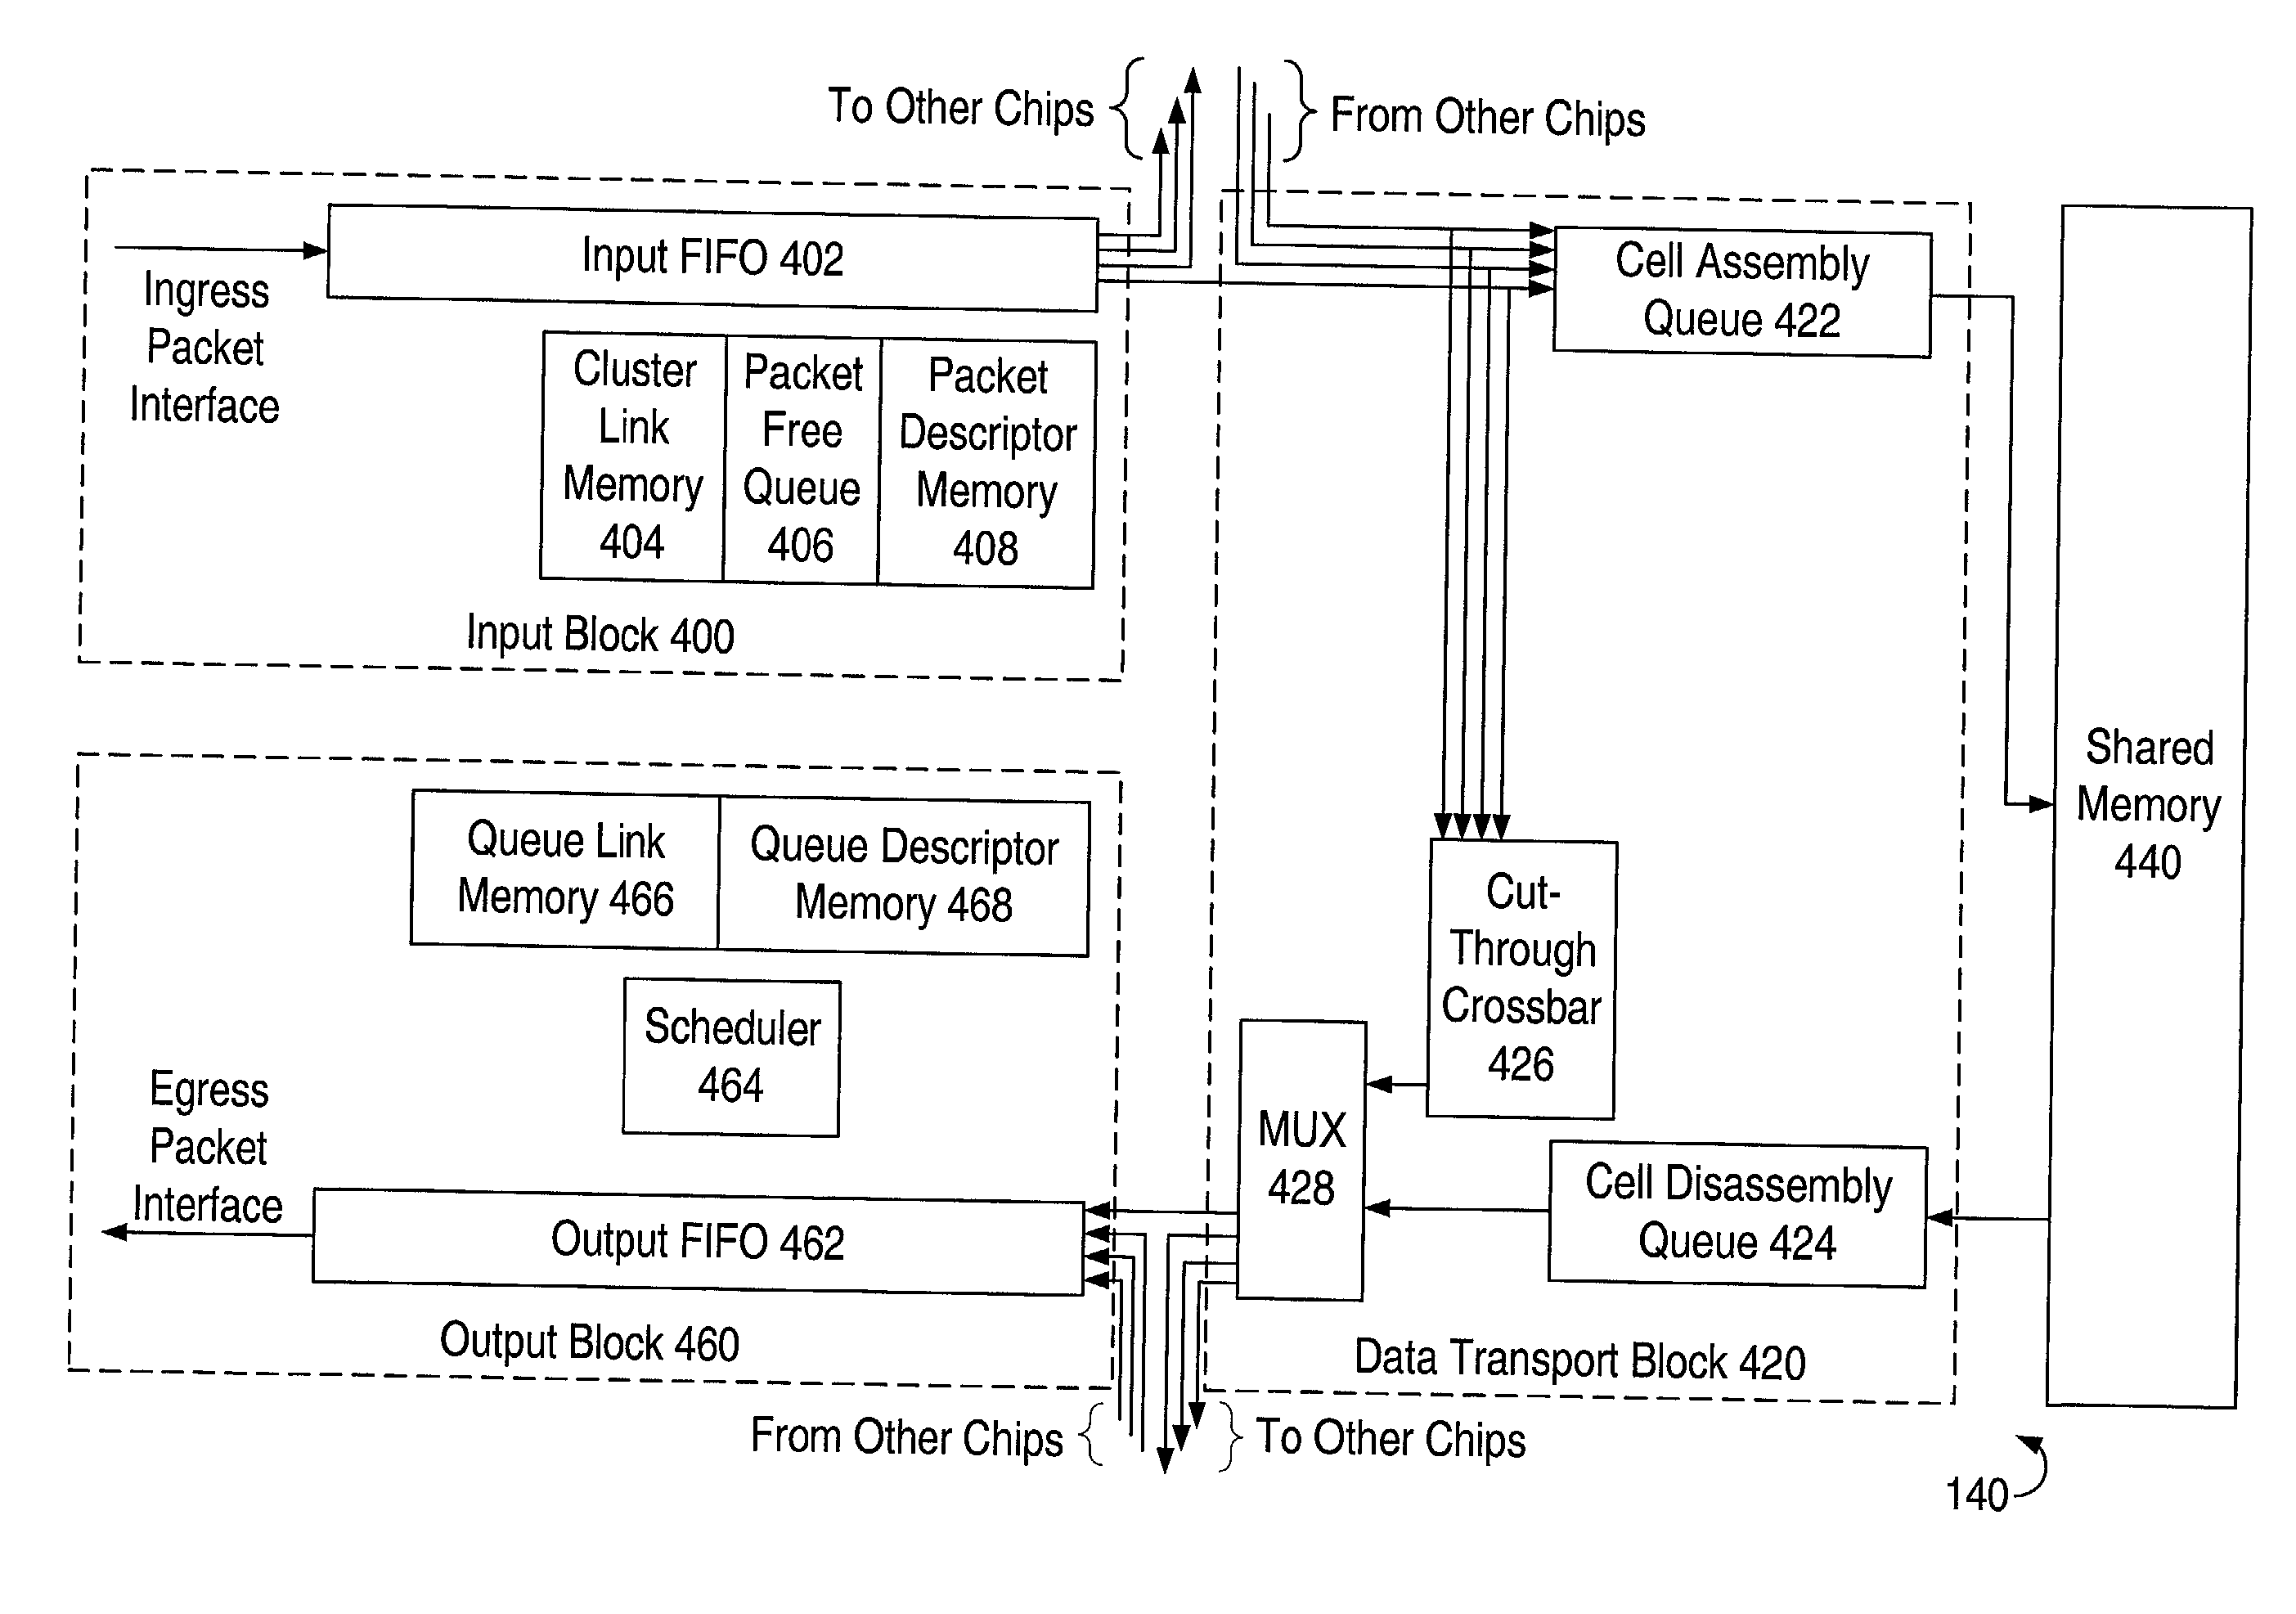 Packet input thresholding for resource distribution in a network switch